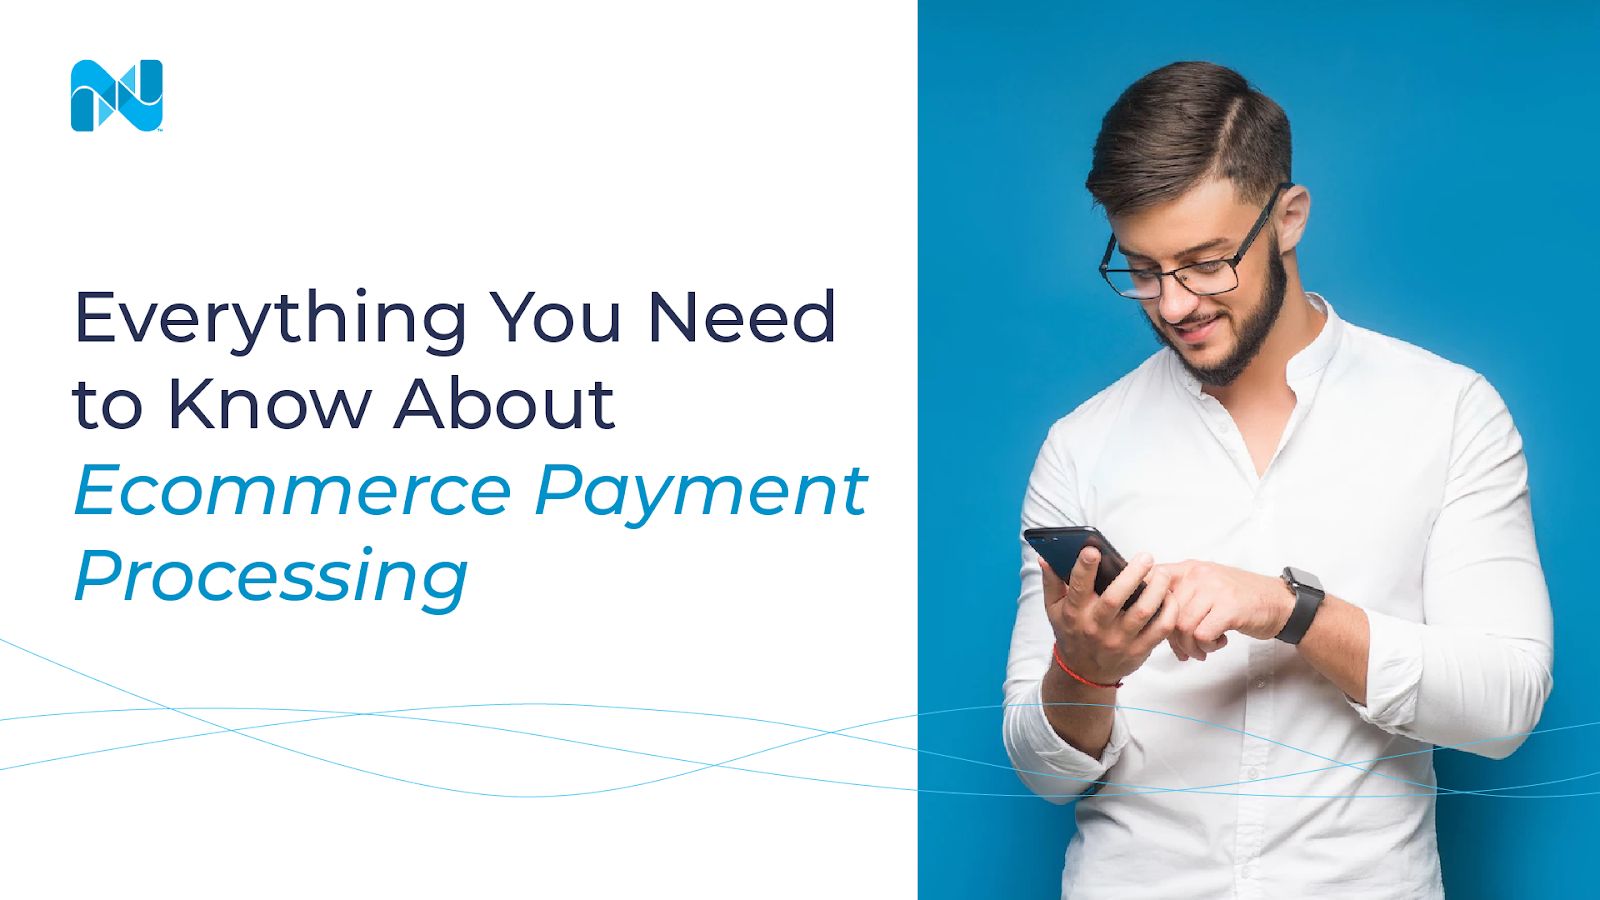 The ultimate guide to ecommerce payment processing.